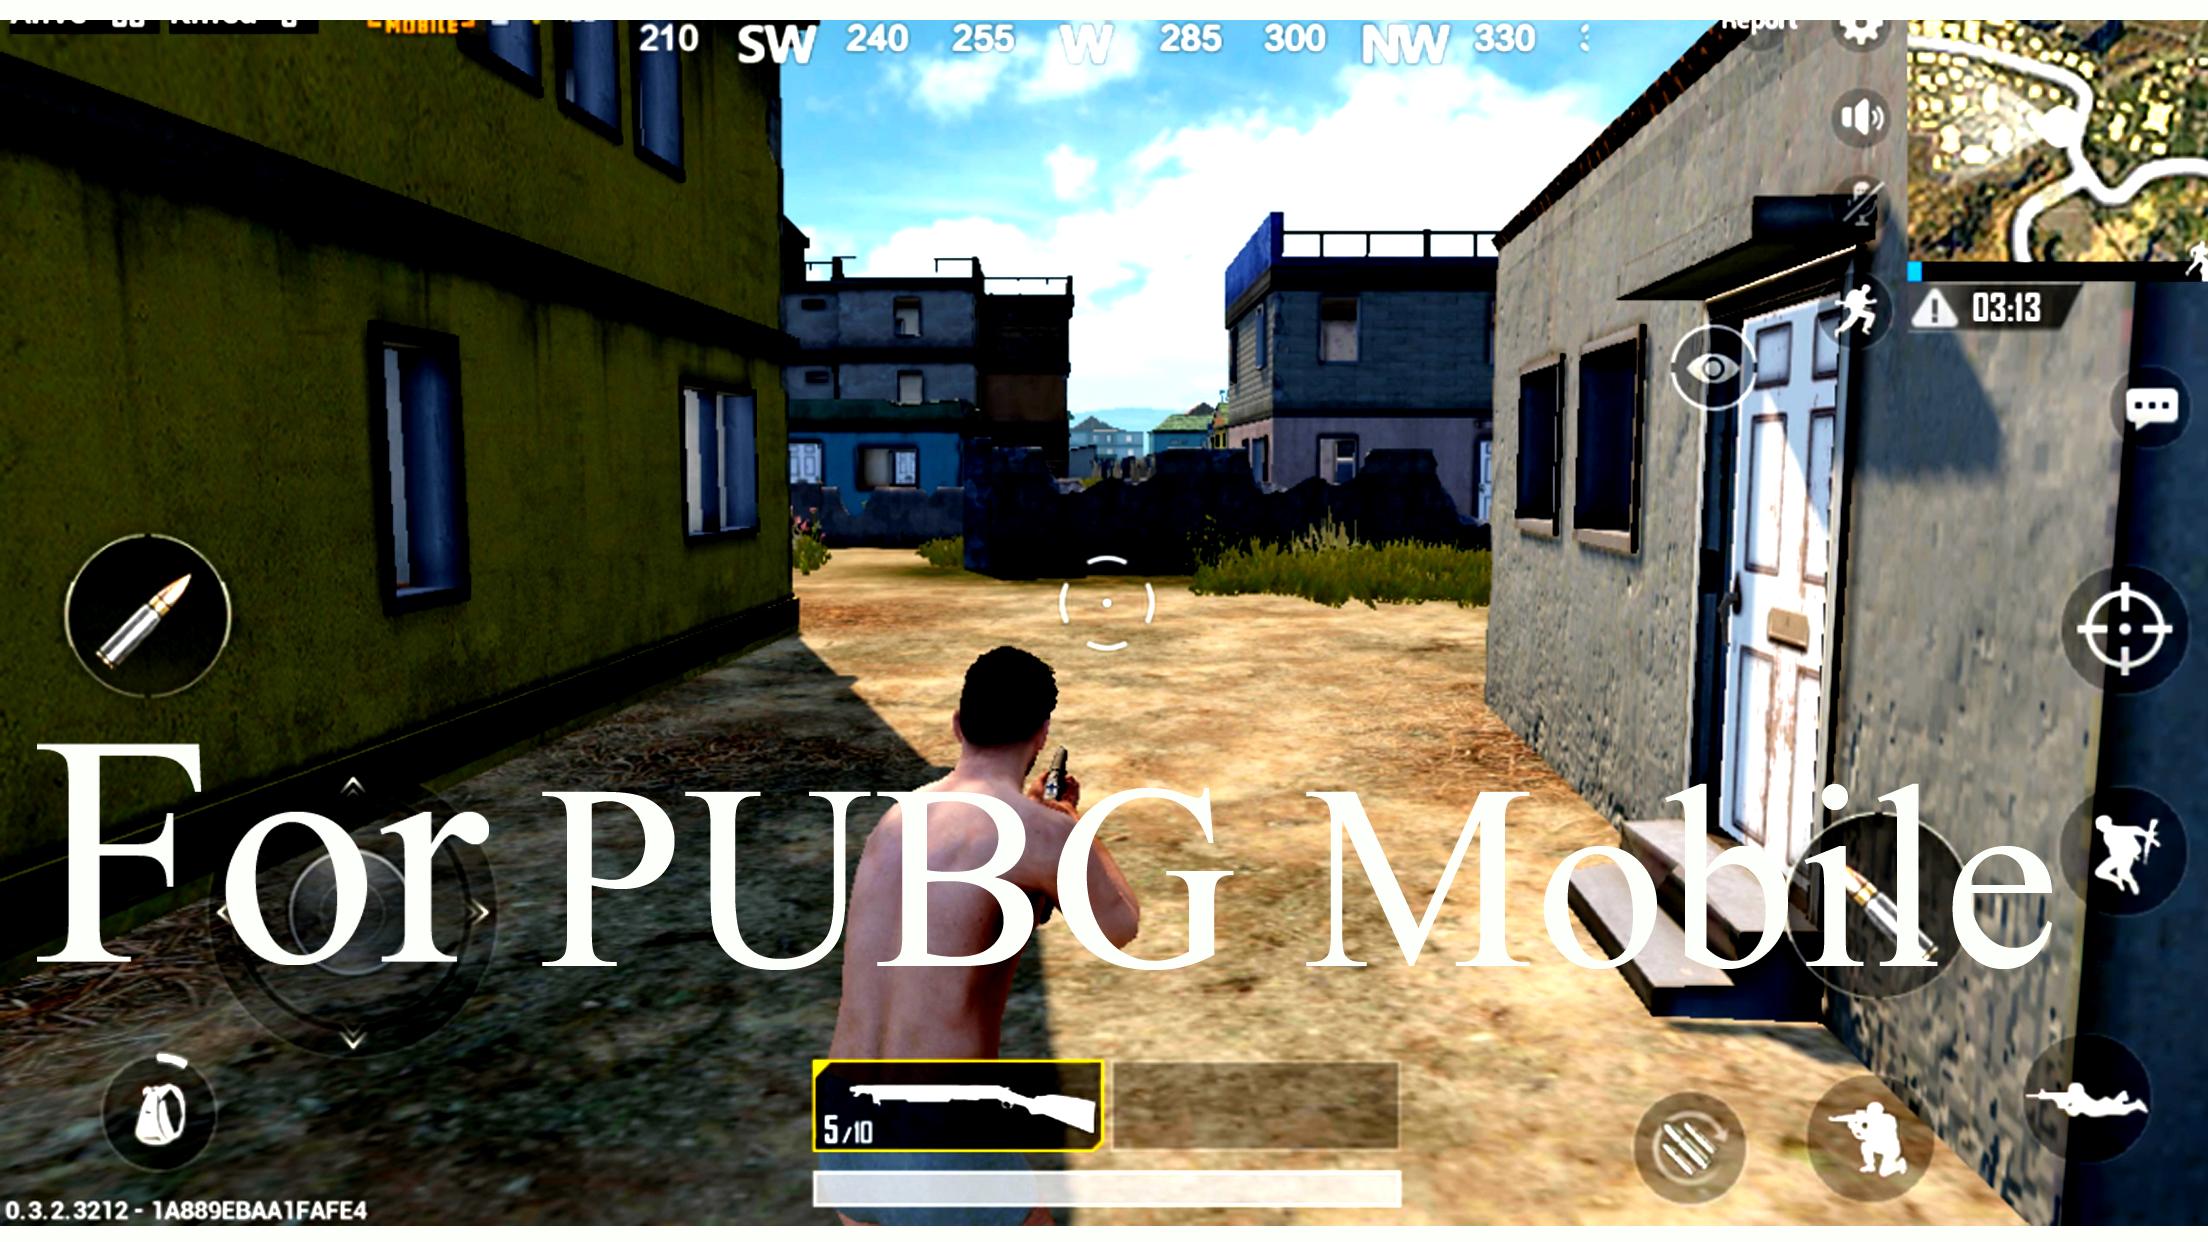 Guide For Pubg Mobile 2020 For Android Apk Download